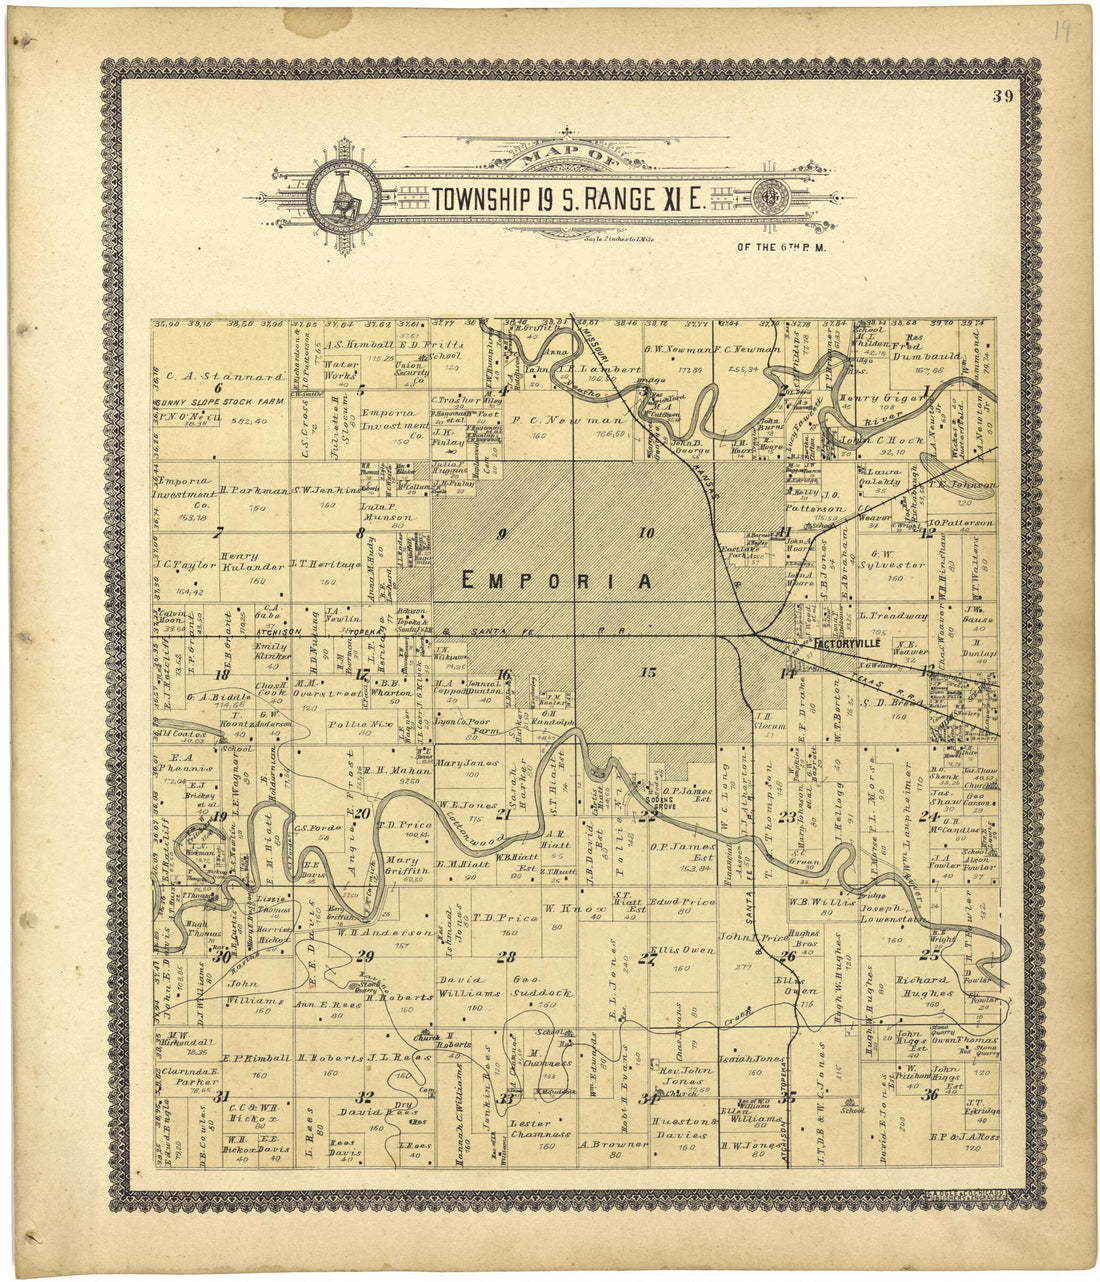 This old map of Map of Township 19 S. Range XI E. from Standard Atlas of Lyon County, Kansas from 1901 was created by  Geo. A. Ogle &amp; Co in 1901